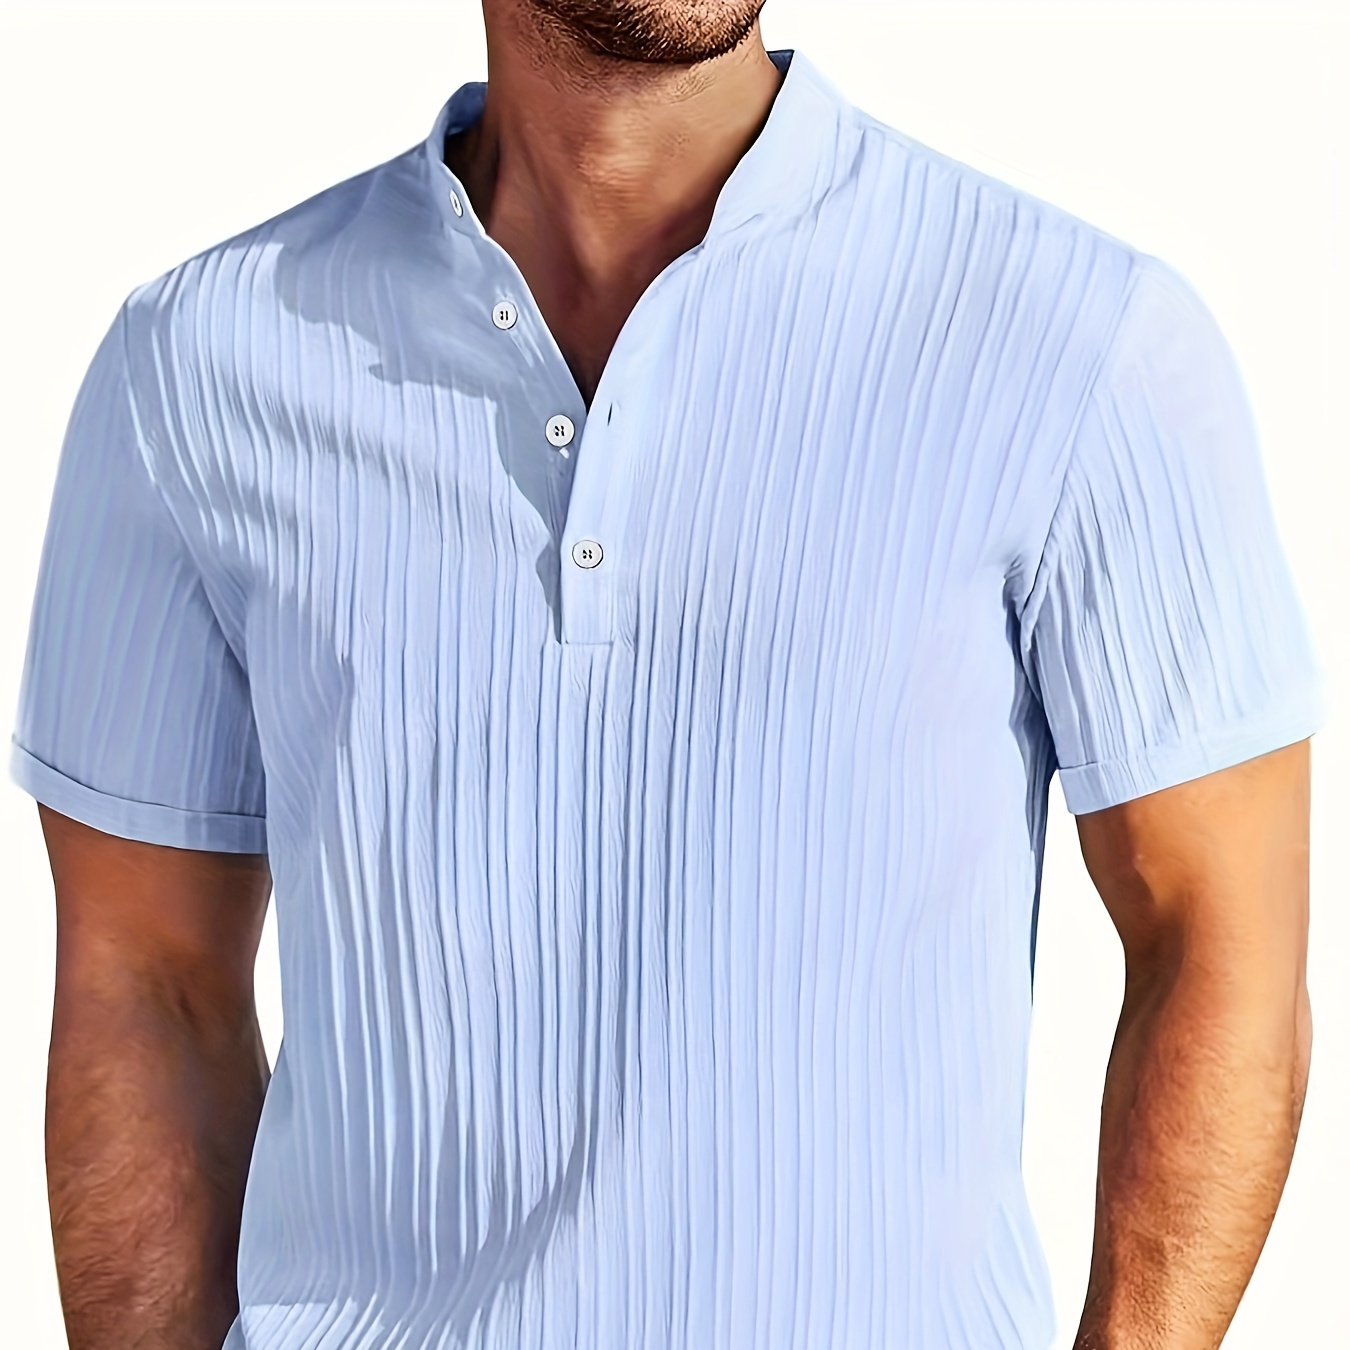 

Solid Color Men's Short Sleeve Stand Collar Henley Shirt With Stripe Pattern Fabric, Chic And Trendy Tops For Summer Daily Wear And Vacation Resorts